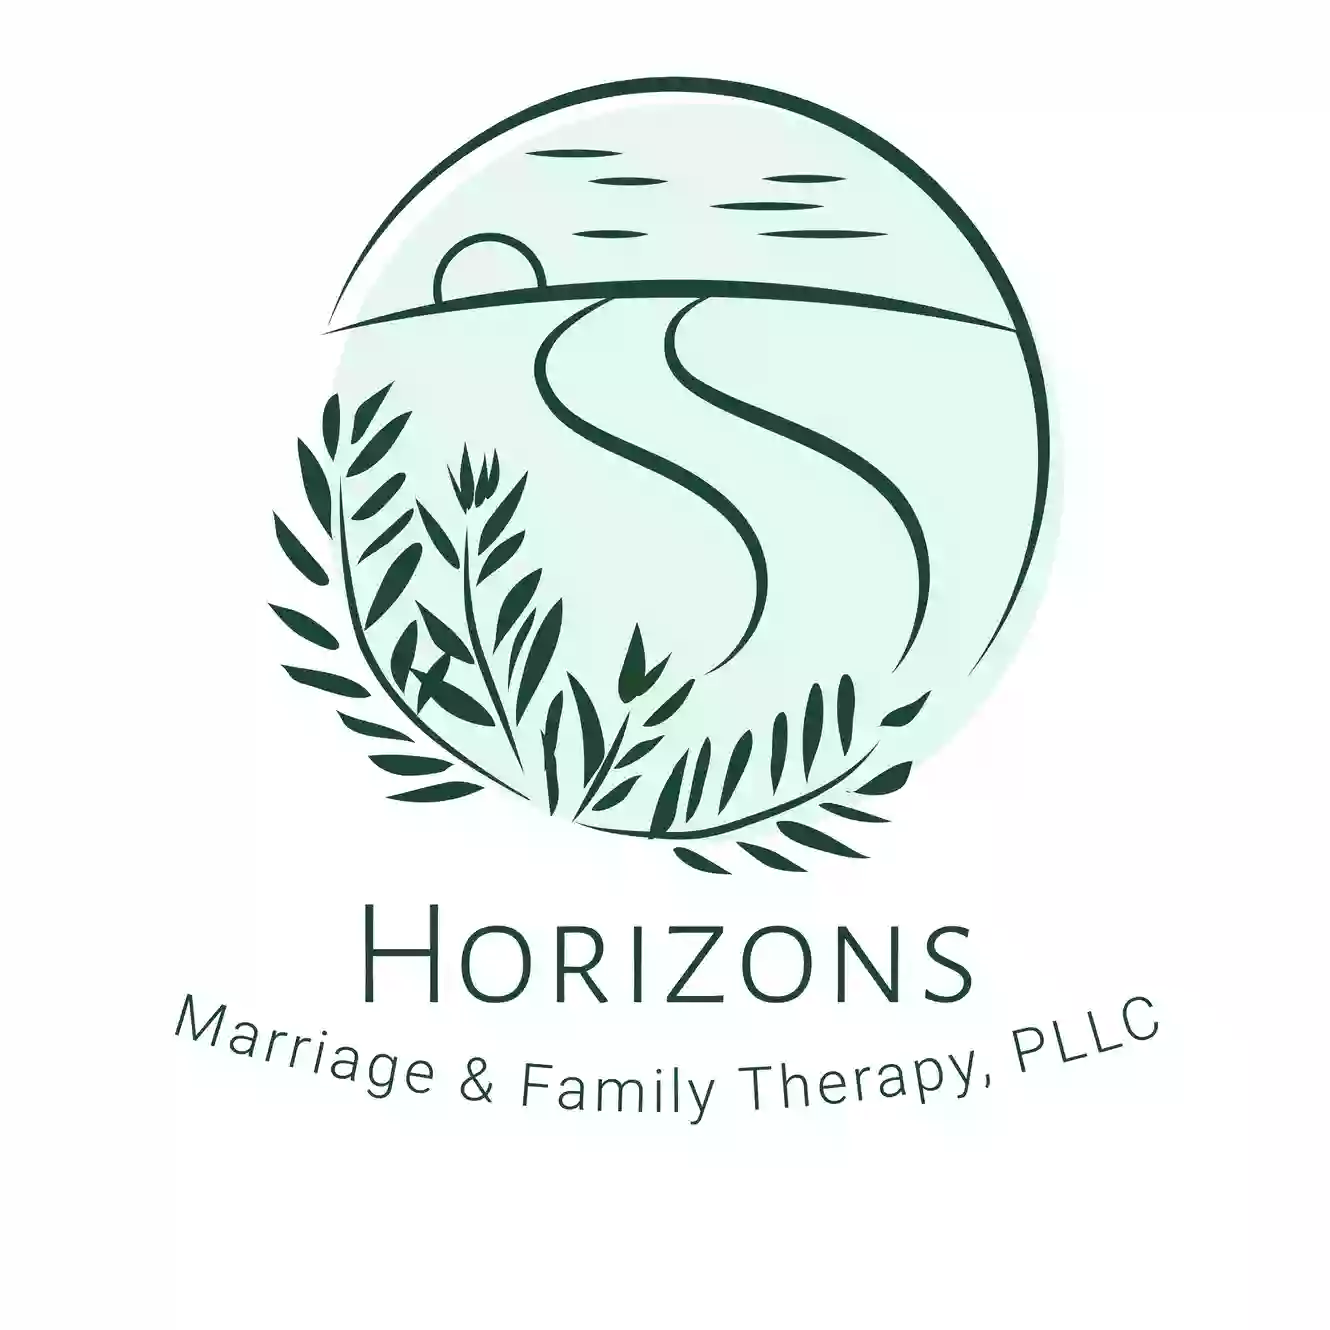 Horizons Marriage & Family Therapy, PLLC